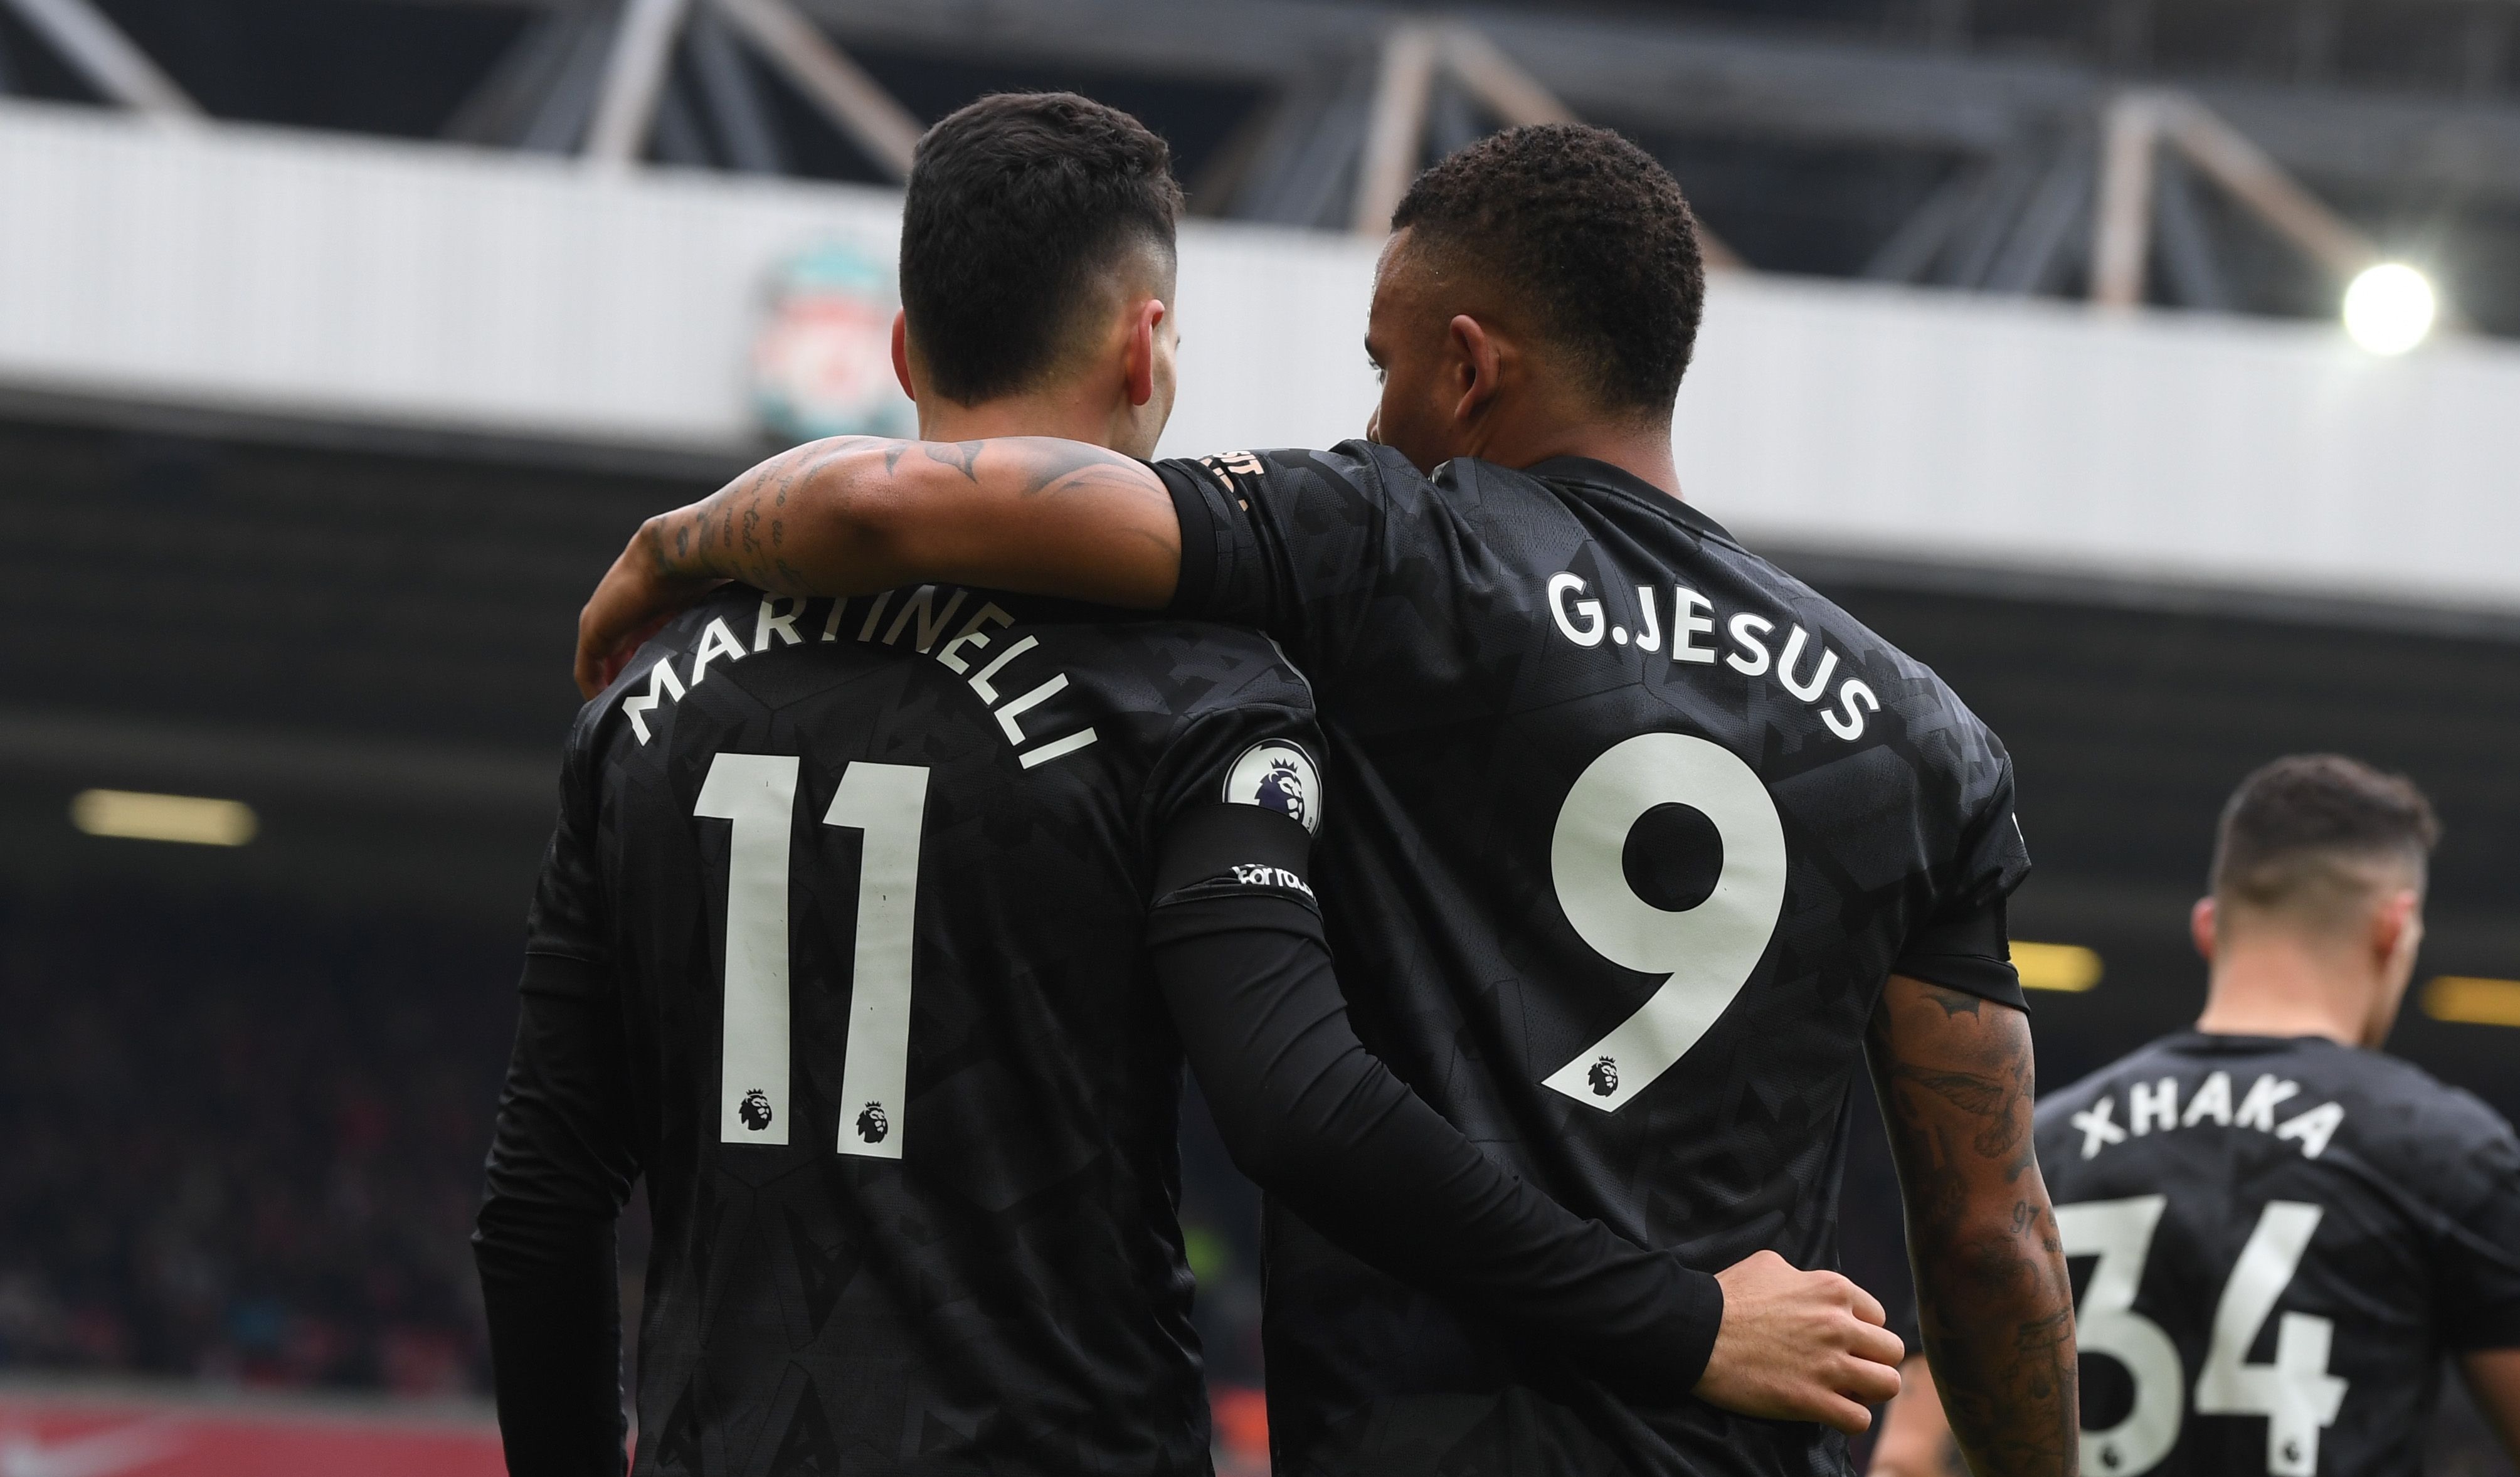 LIVERPOOL, ENGLAND - APRIL 09: (L-R) Gabriel Martinelli and Gabriel Jesus of Arsenal during the Premier League match between Liverpool FC and Arsenal FC at Anfield on April 09, 2023 in Liverpool, England. (Photo by Stuart MacFarlane/Arsenal FC via Getty Images)